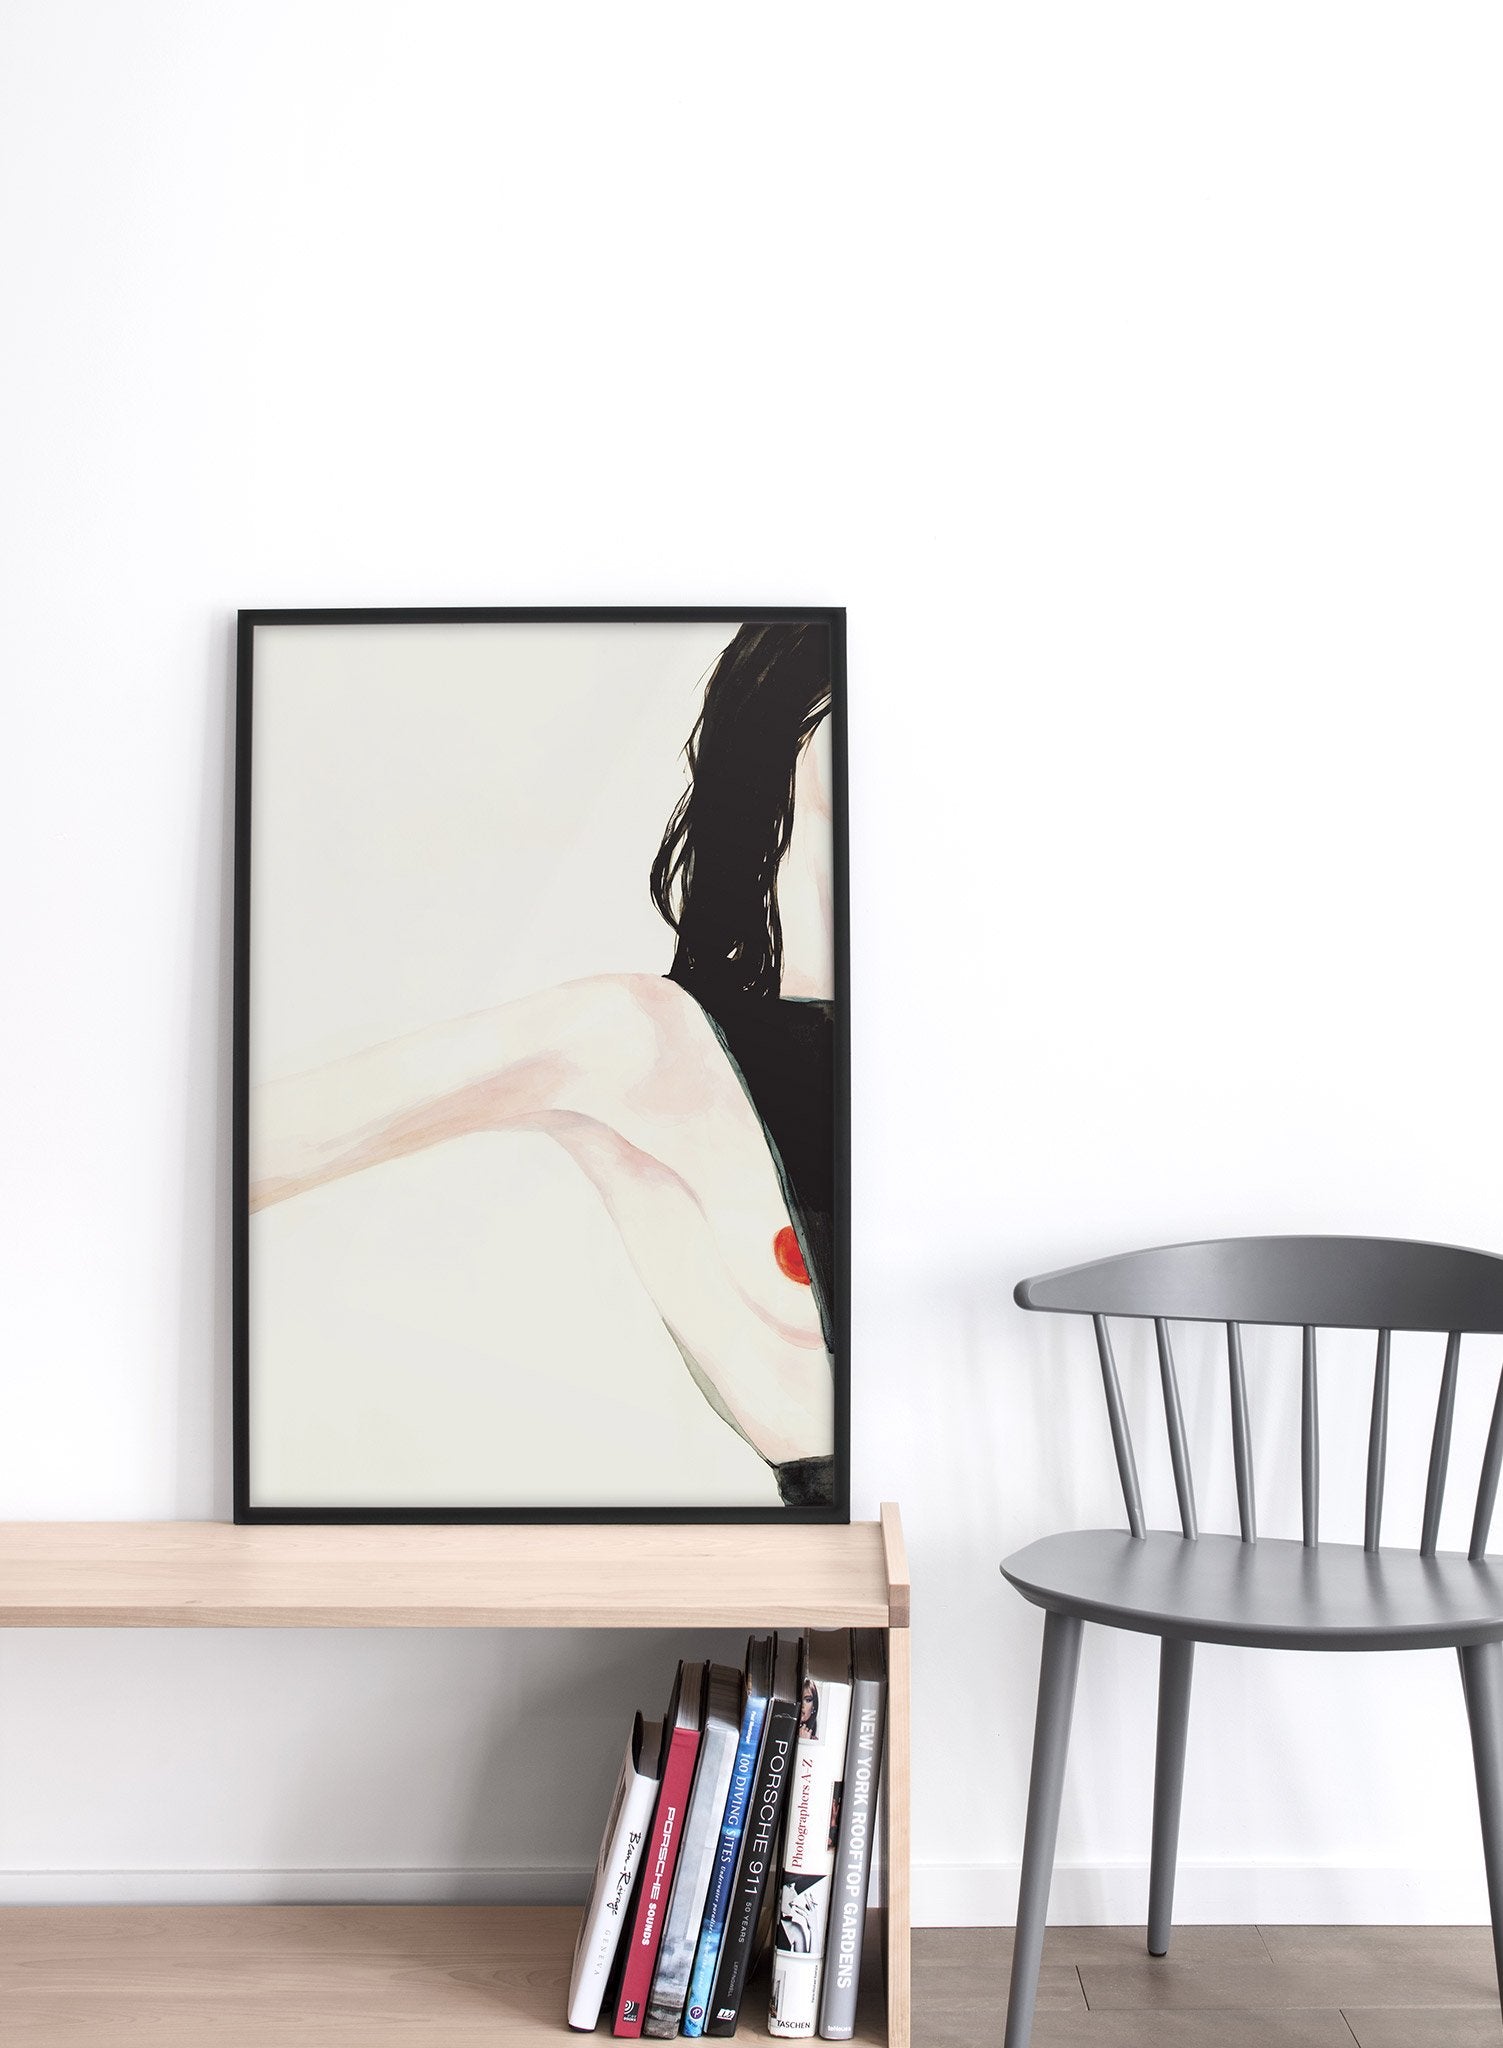 Fashion illustration poster by Opposite Wall with woman in risqué outfit - Lifestyle - Living Room